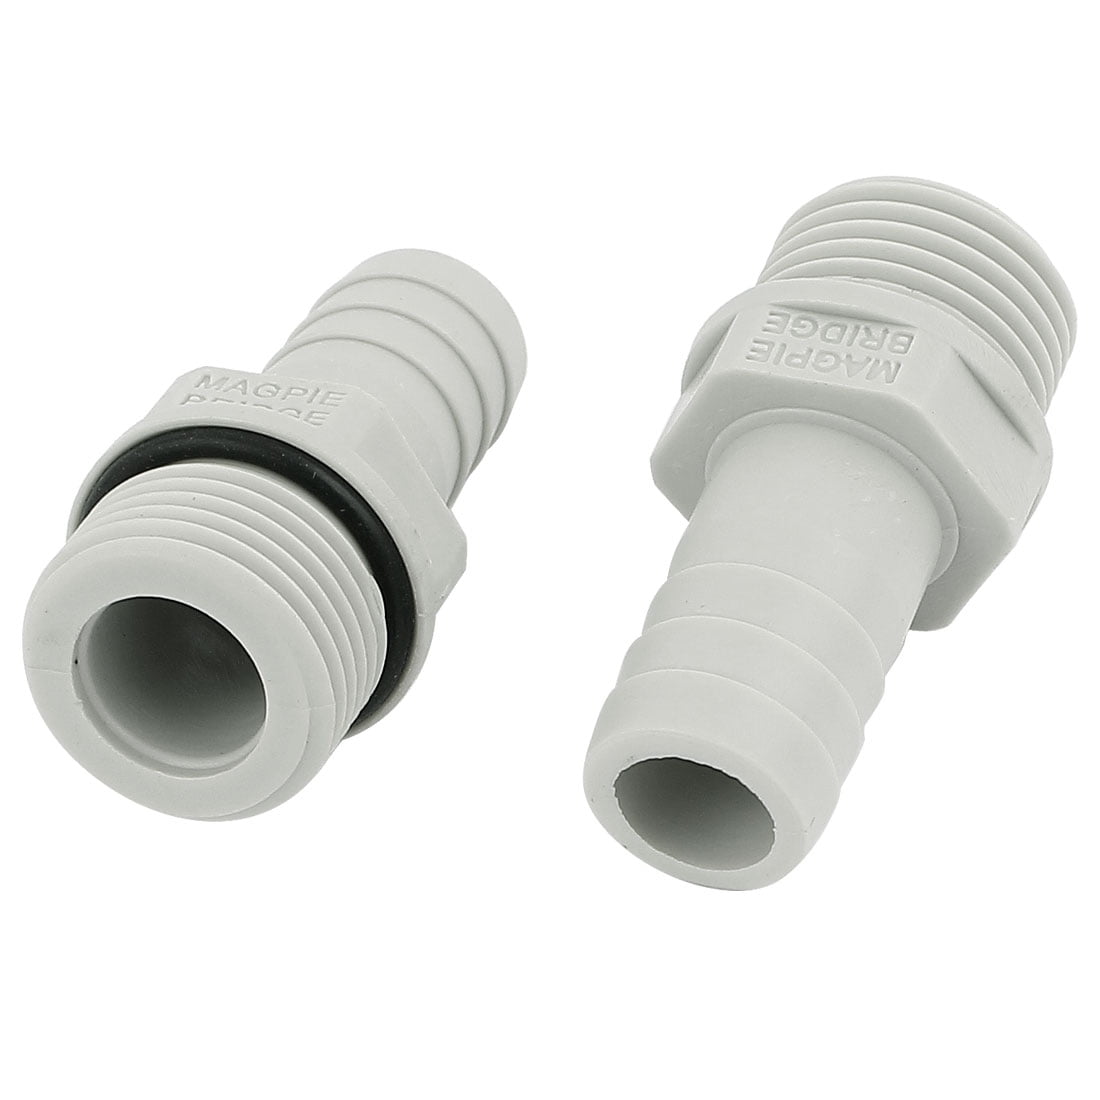 2" Pipe Fitting Industrial PVC Threaded Hose Tail Adaptor Male BSP x Barb 1/2" 